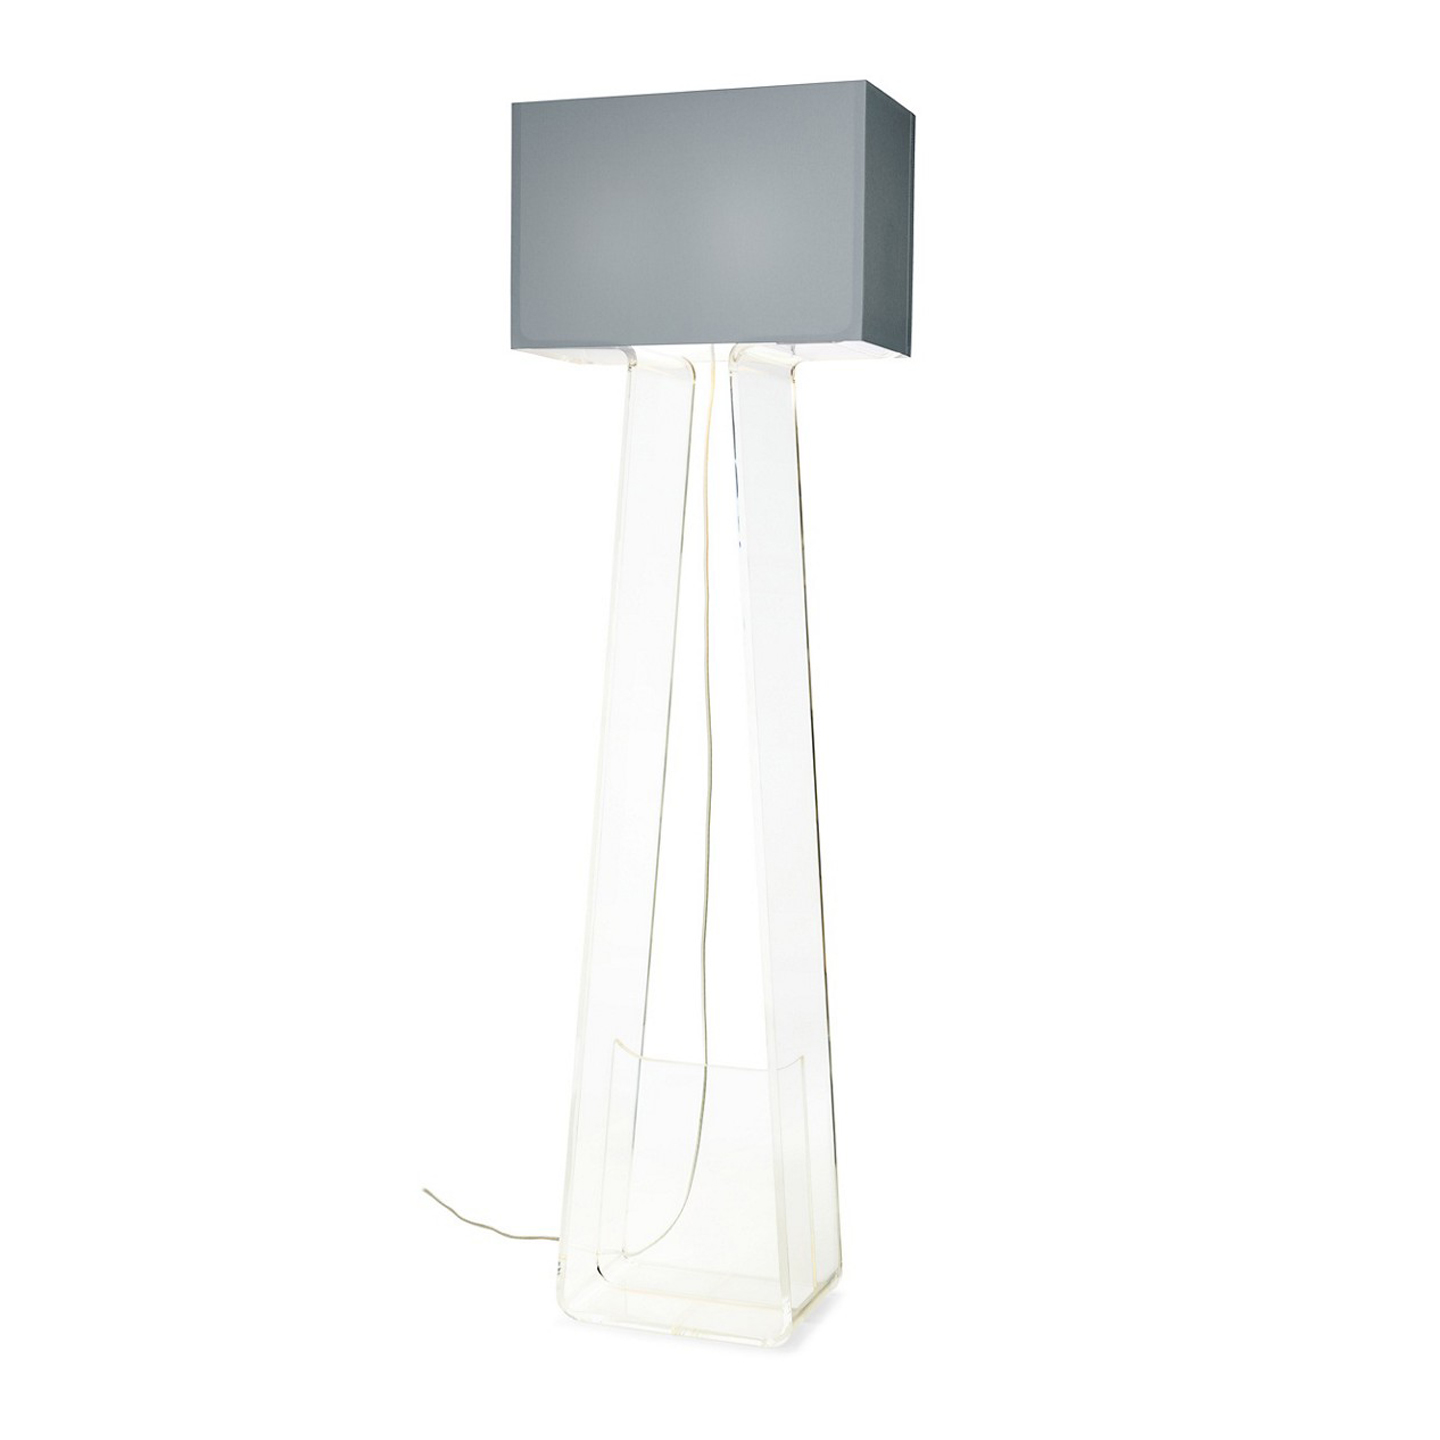 Haworth Tube Top Lighting in grey lamp color and clear base